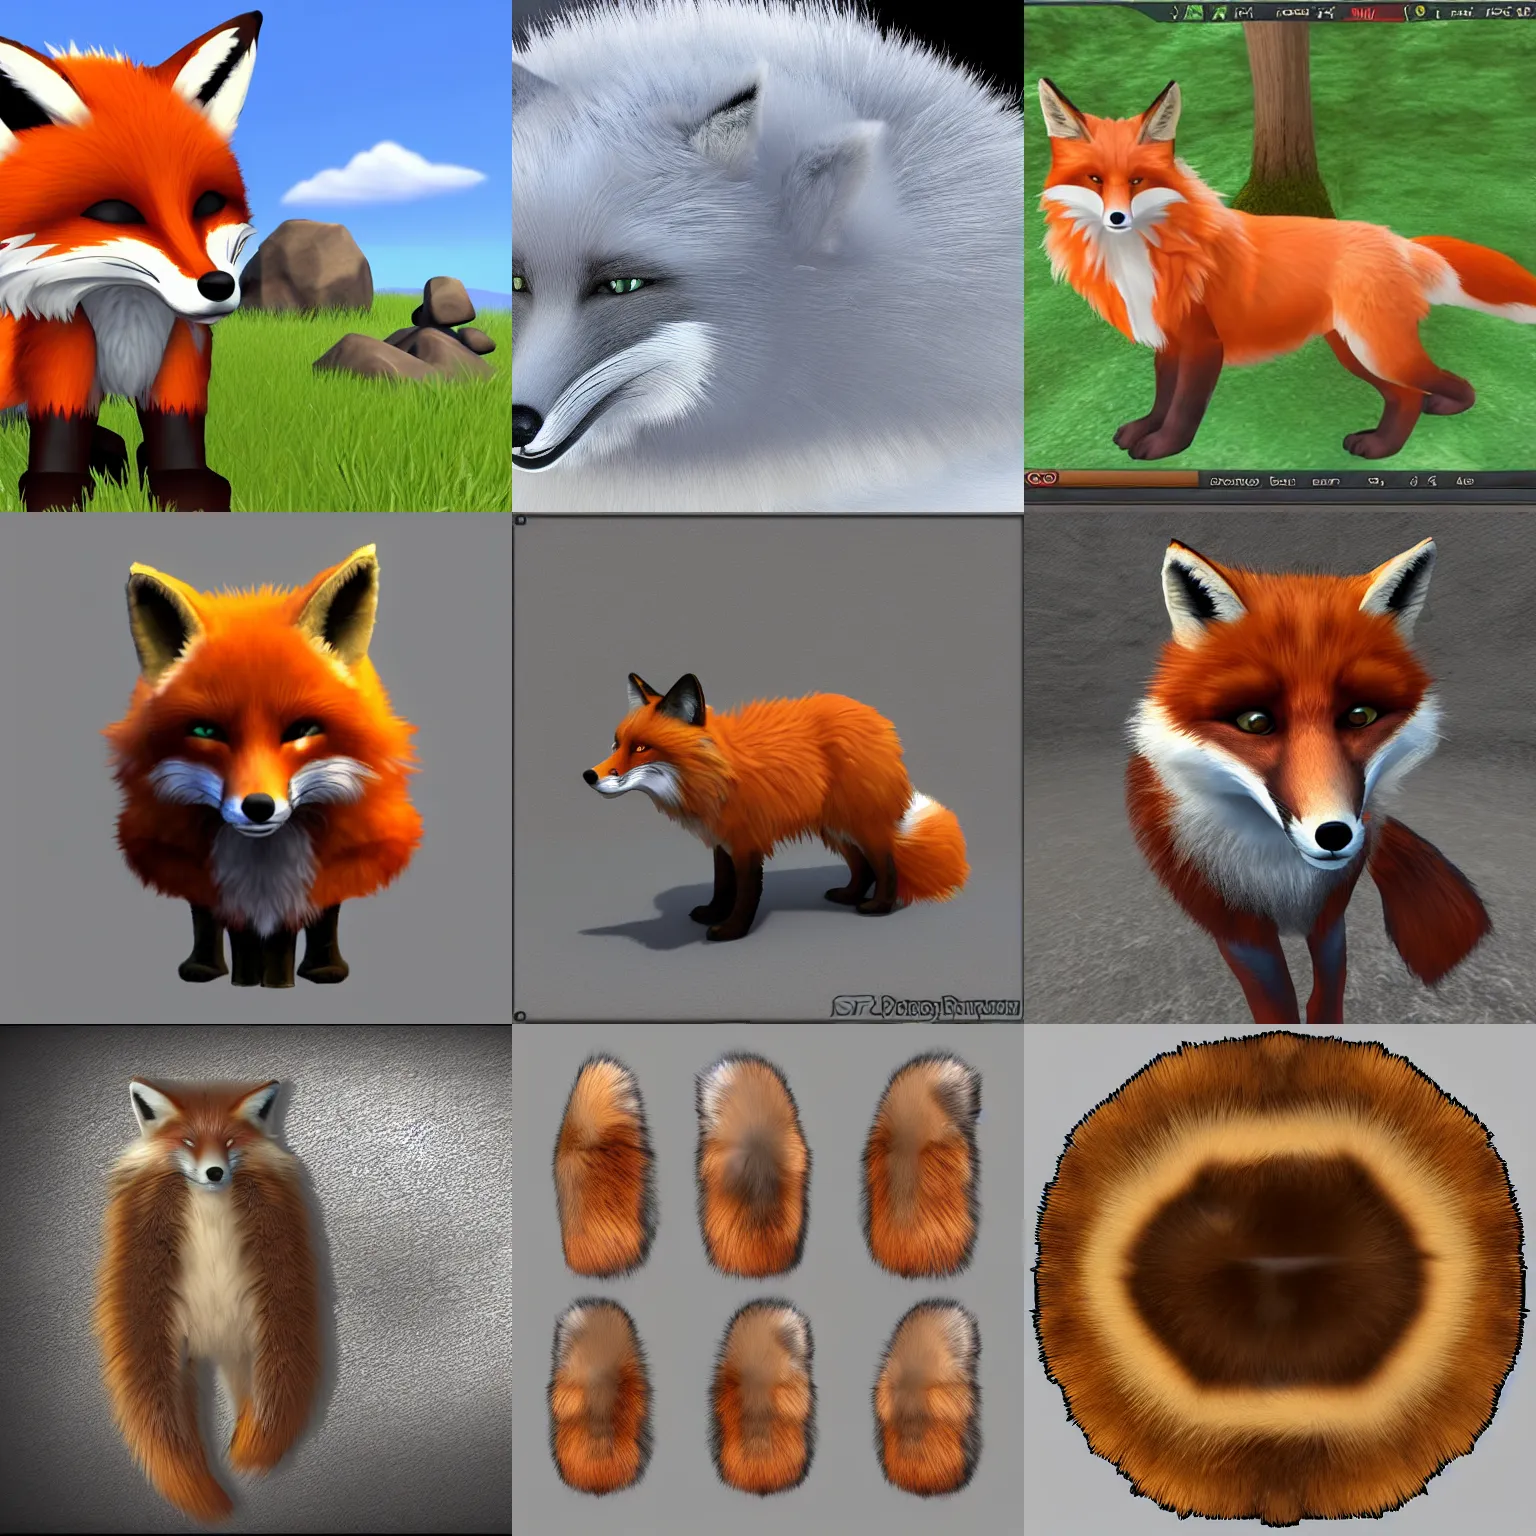 hawnmain (semi-inactive) on X: furry fox from minecraft #fundy   / X